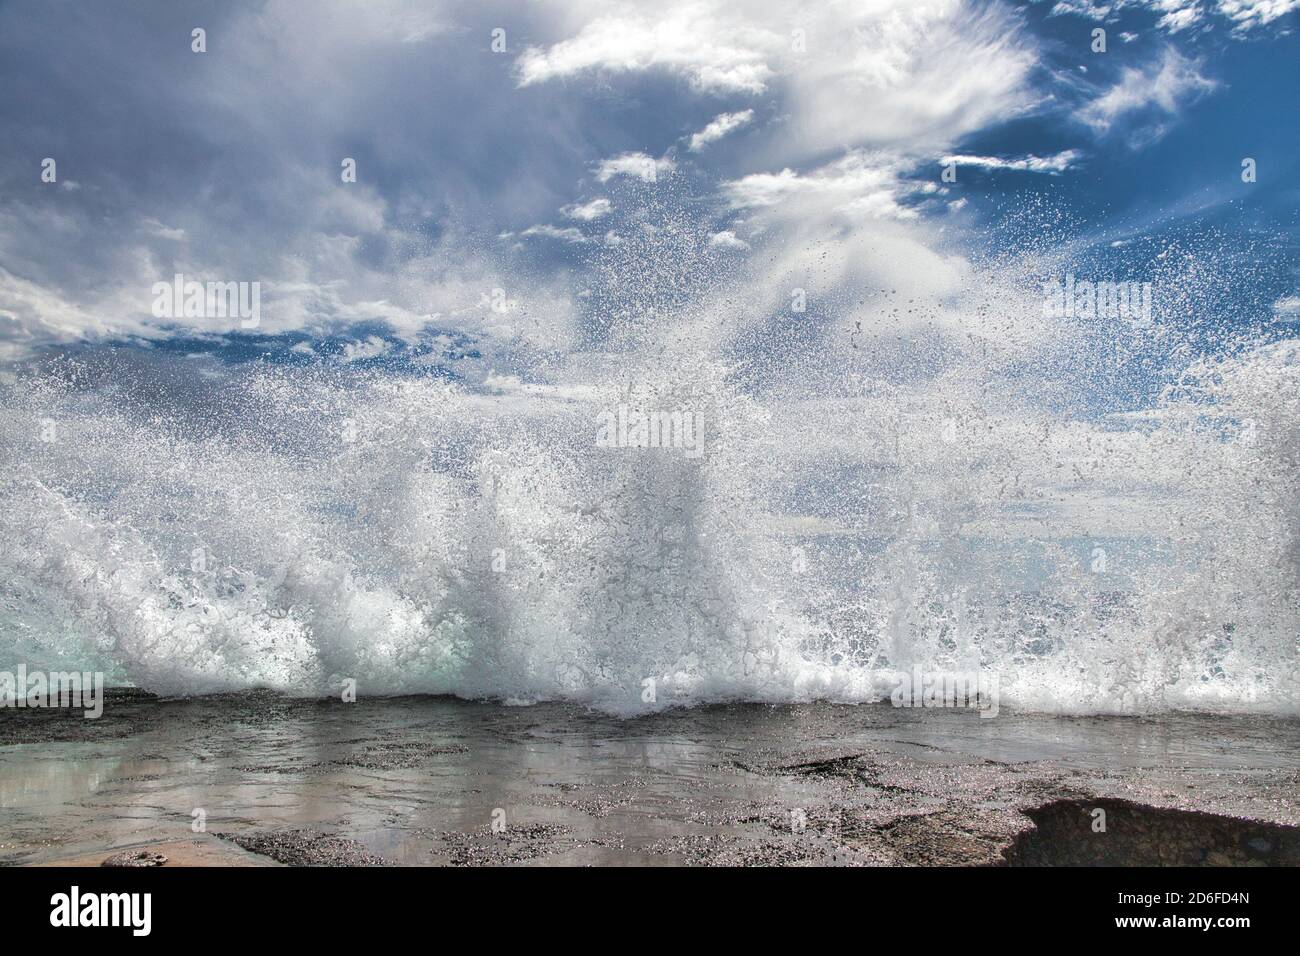 Spectacular dislay of the force of nature as a wave breaks against the pier at Olawalu Landing. Stock Photo